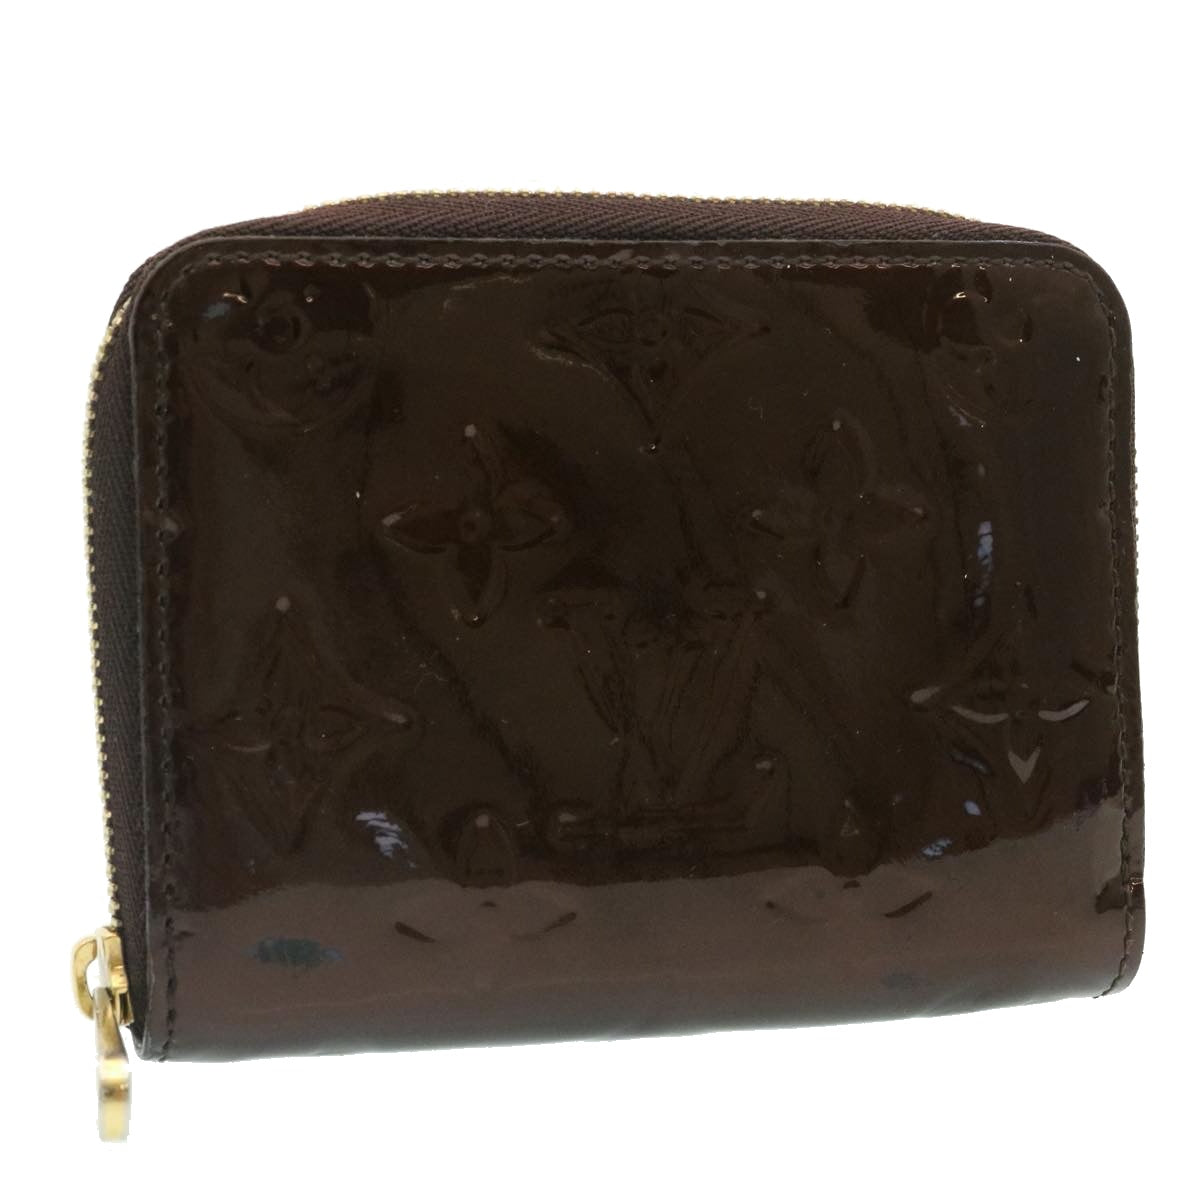 Zippy Coin Purse Monogram Vernis Leather - Women - Small Leather Goods